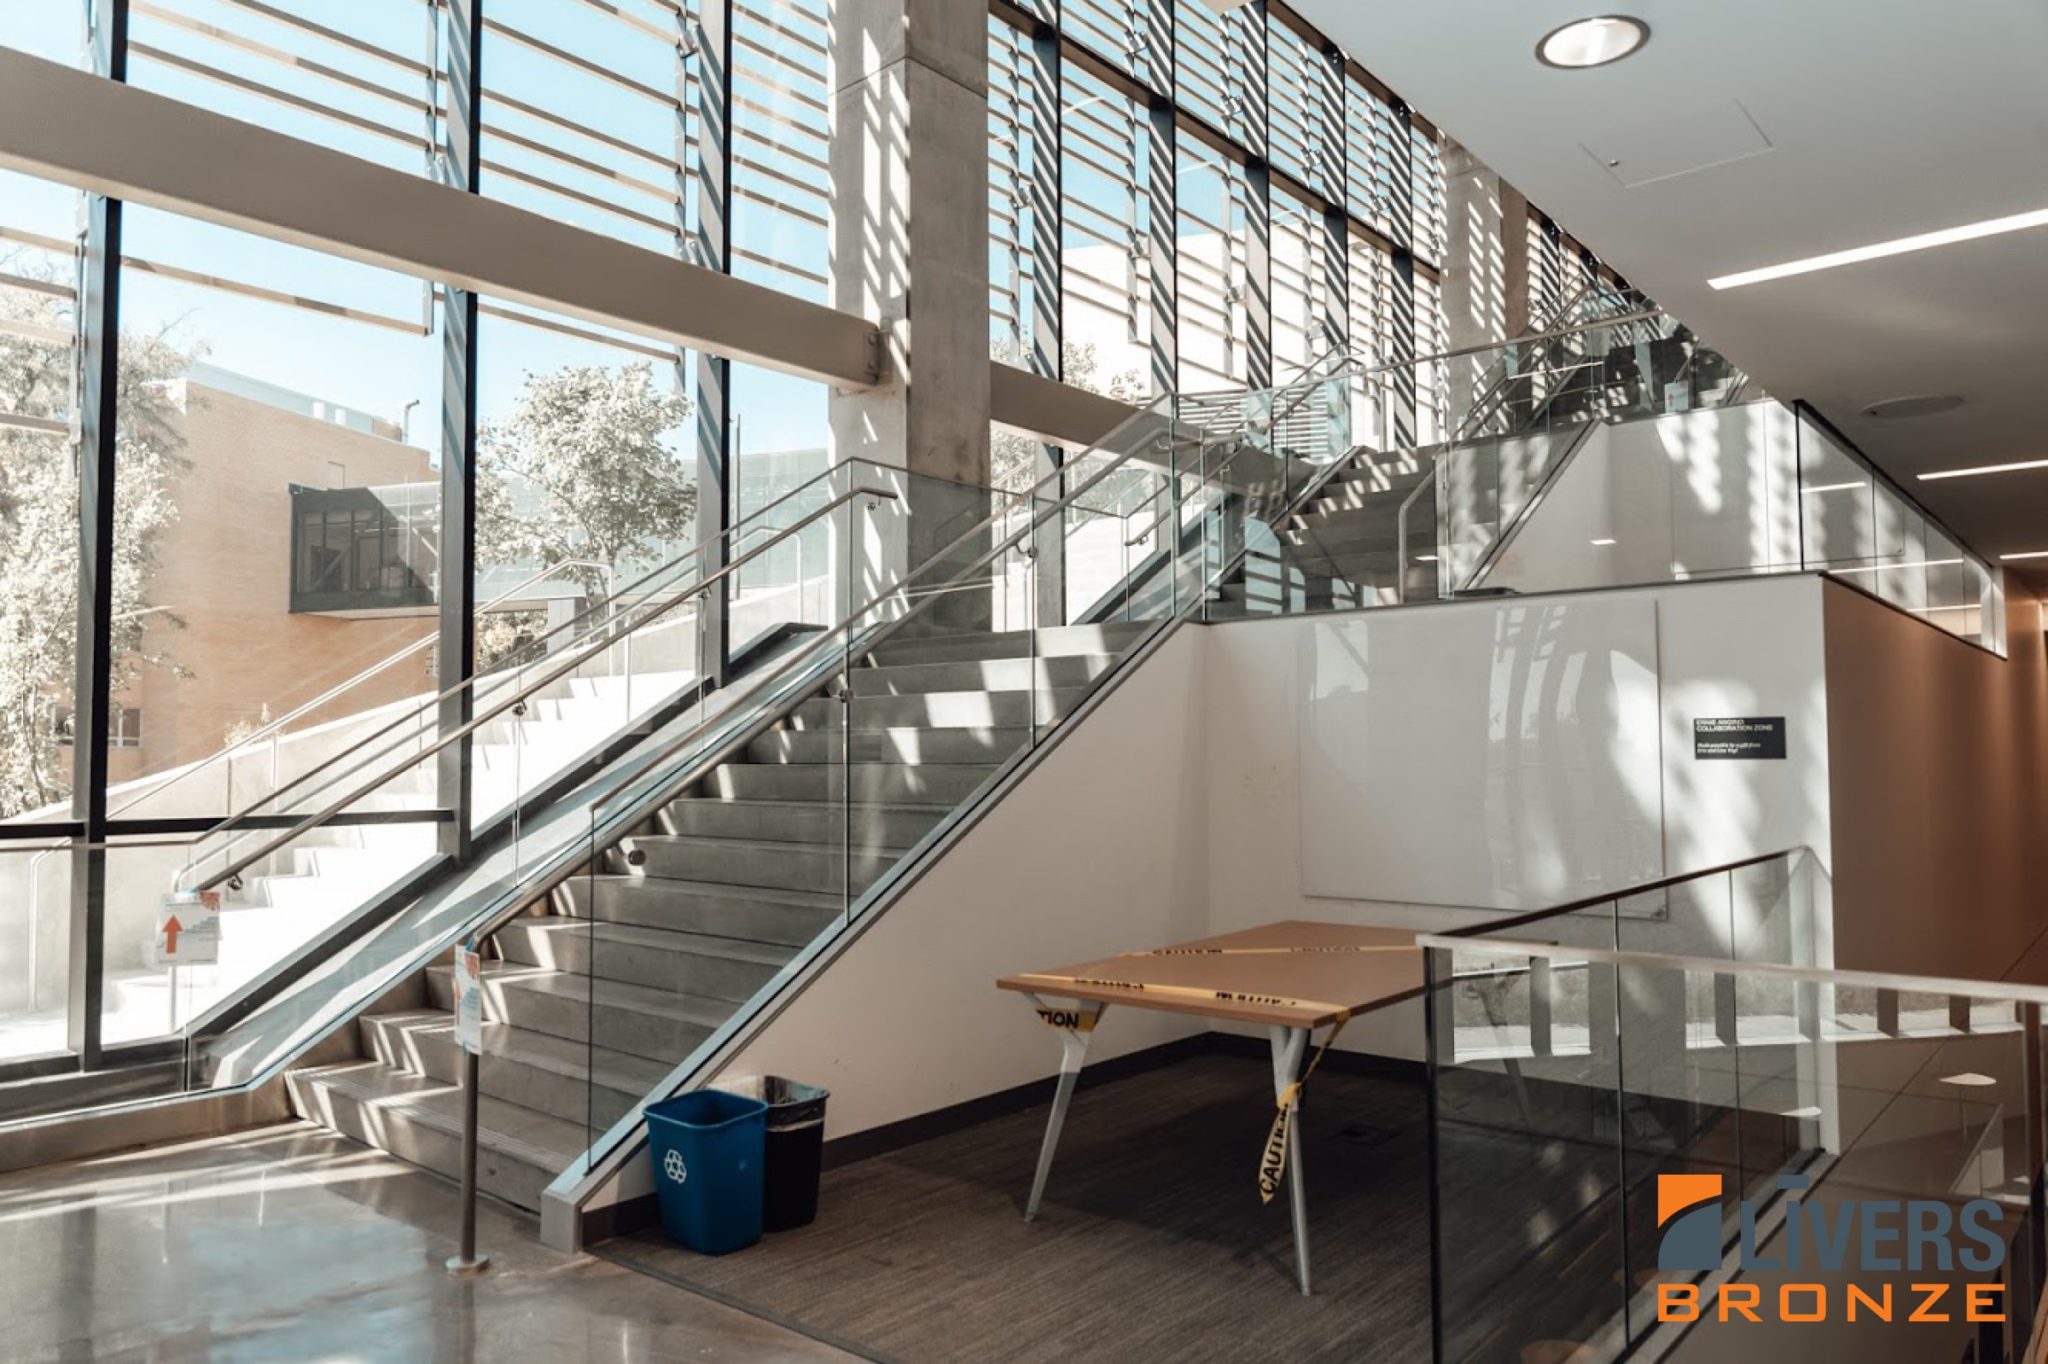 Livers Bronze Struct-U-Rail Commercial Glass Railing installed at Earth, Energy & Environment Center, University of Kansas Lobby Stairs Made in the USA